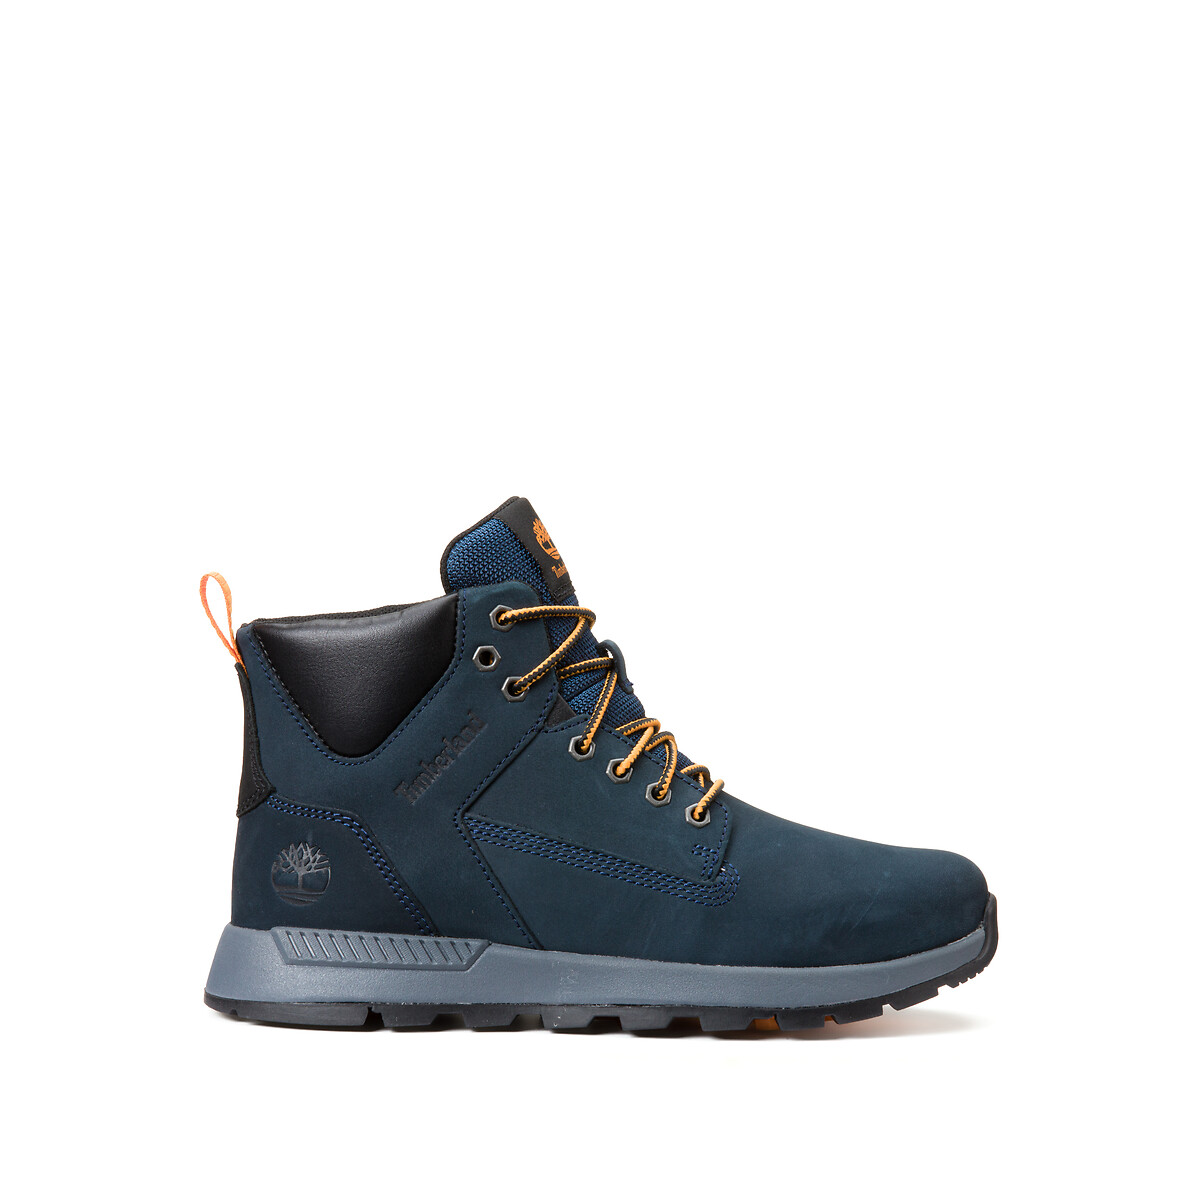 Image of Kids Kilington Trk Chukka Ankle Boots in Leather